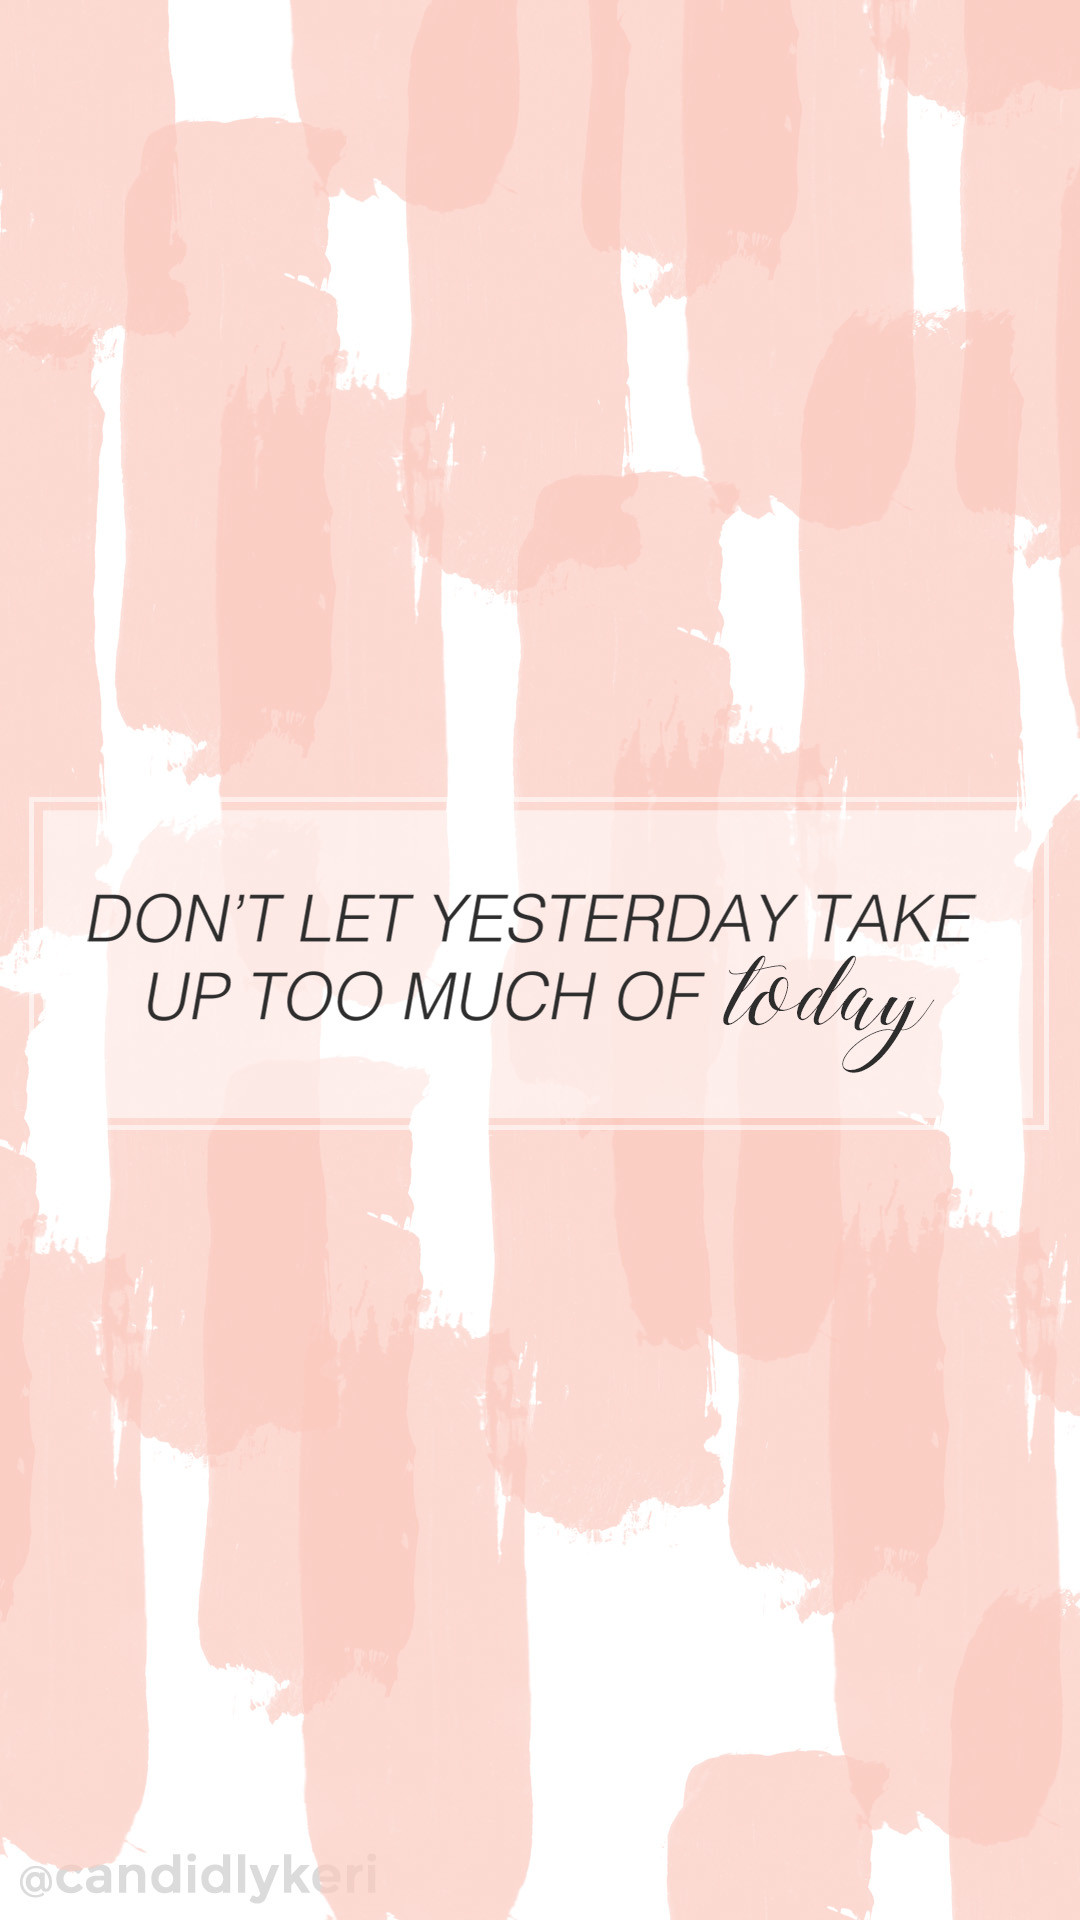 1080x1920 "Dont let yesterday take up too much of today" cute pink stripe quote  inspirational